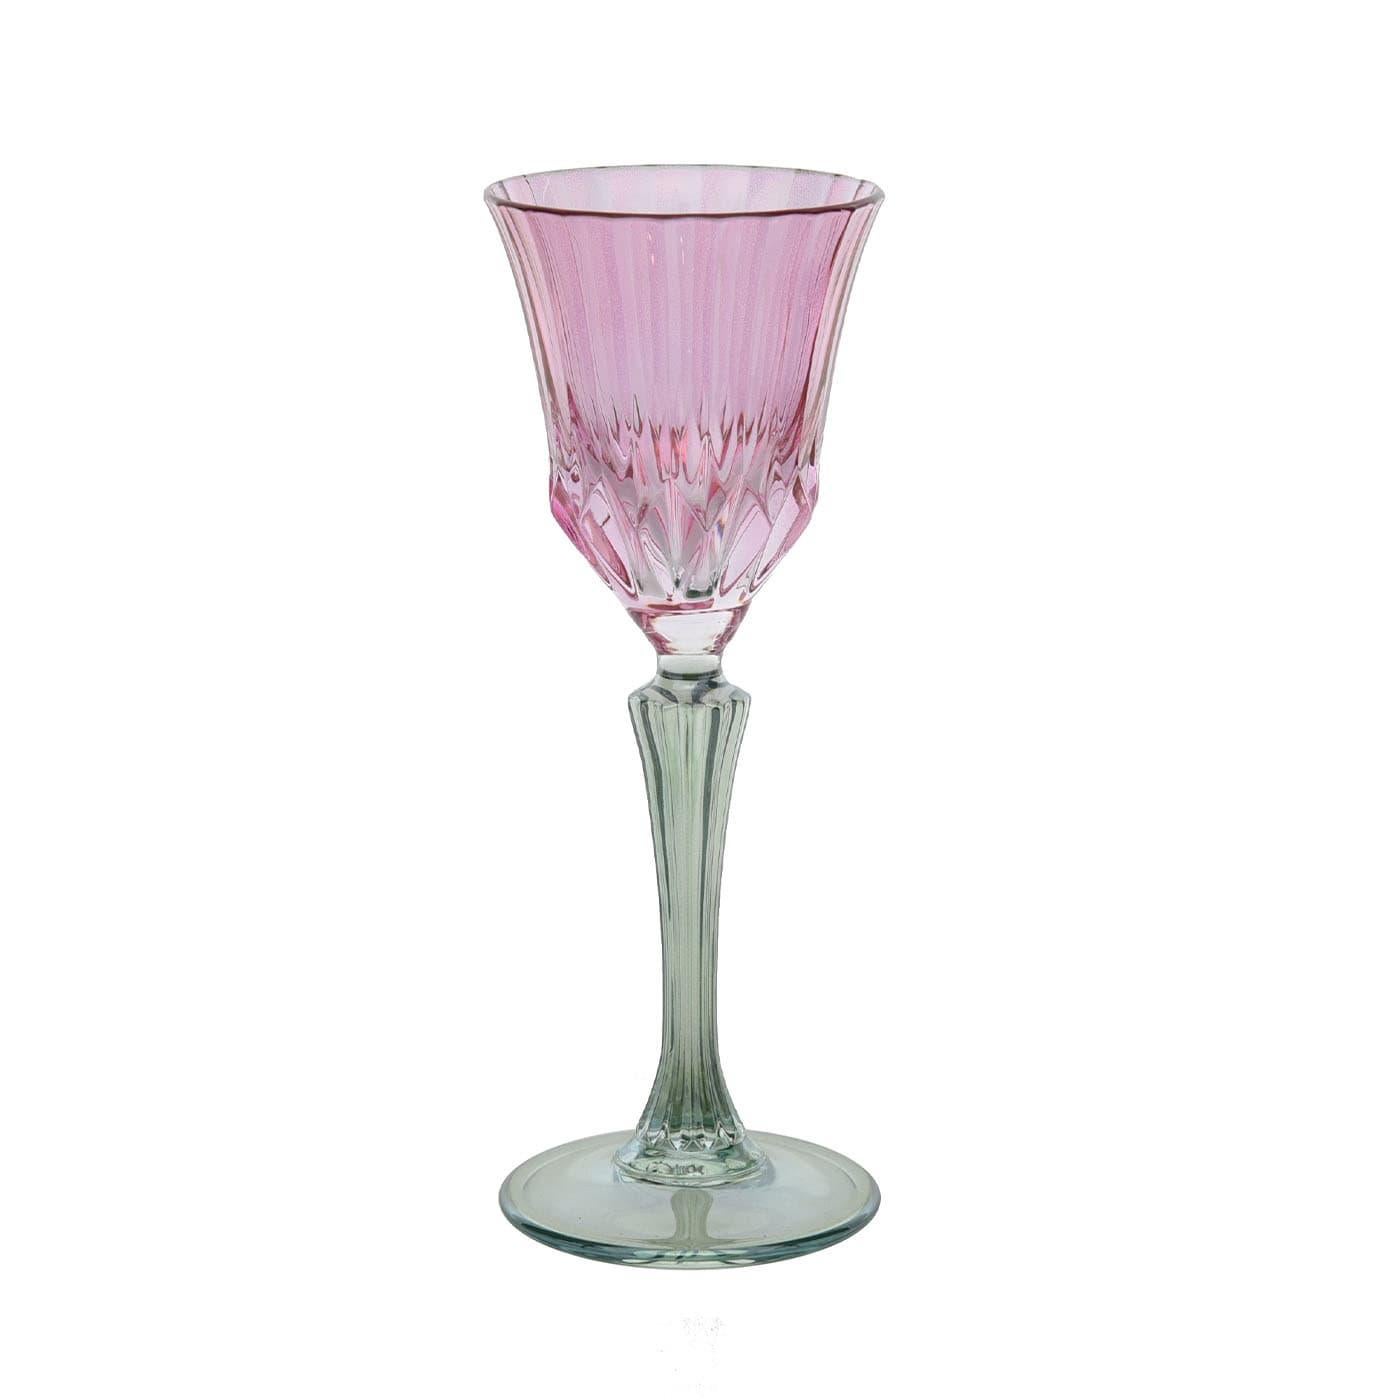 Vibrantly and elegantly colored, this set of six spirit glasses will be a stunning addition to both traditional and modern homes, infusing a dining table with subtle sophistication. Exquisitely handcrafted of mouth-blown glass, each piece combines